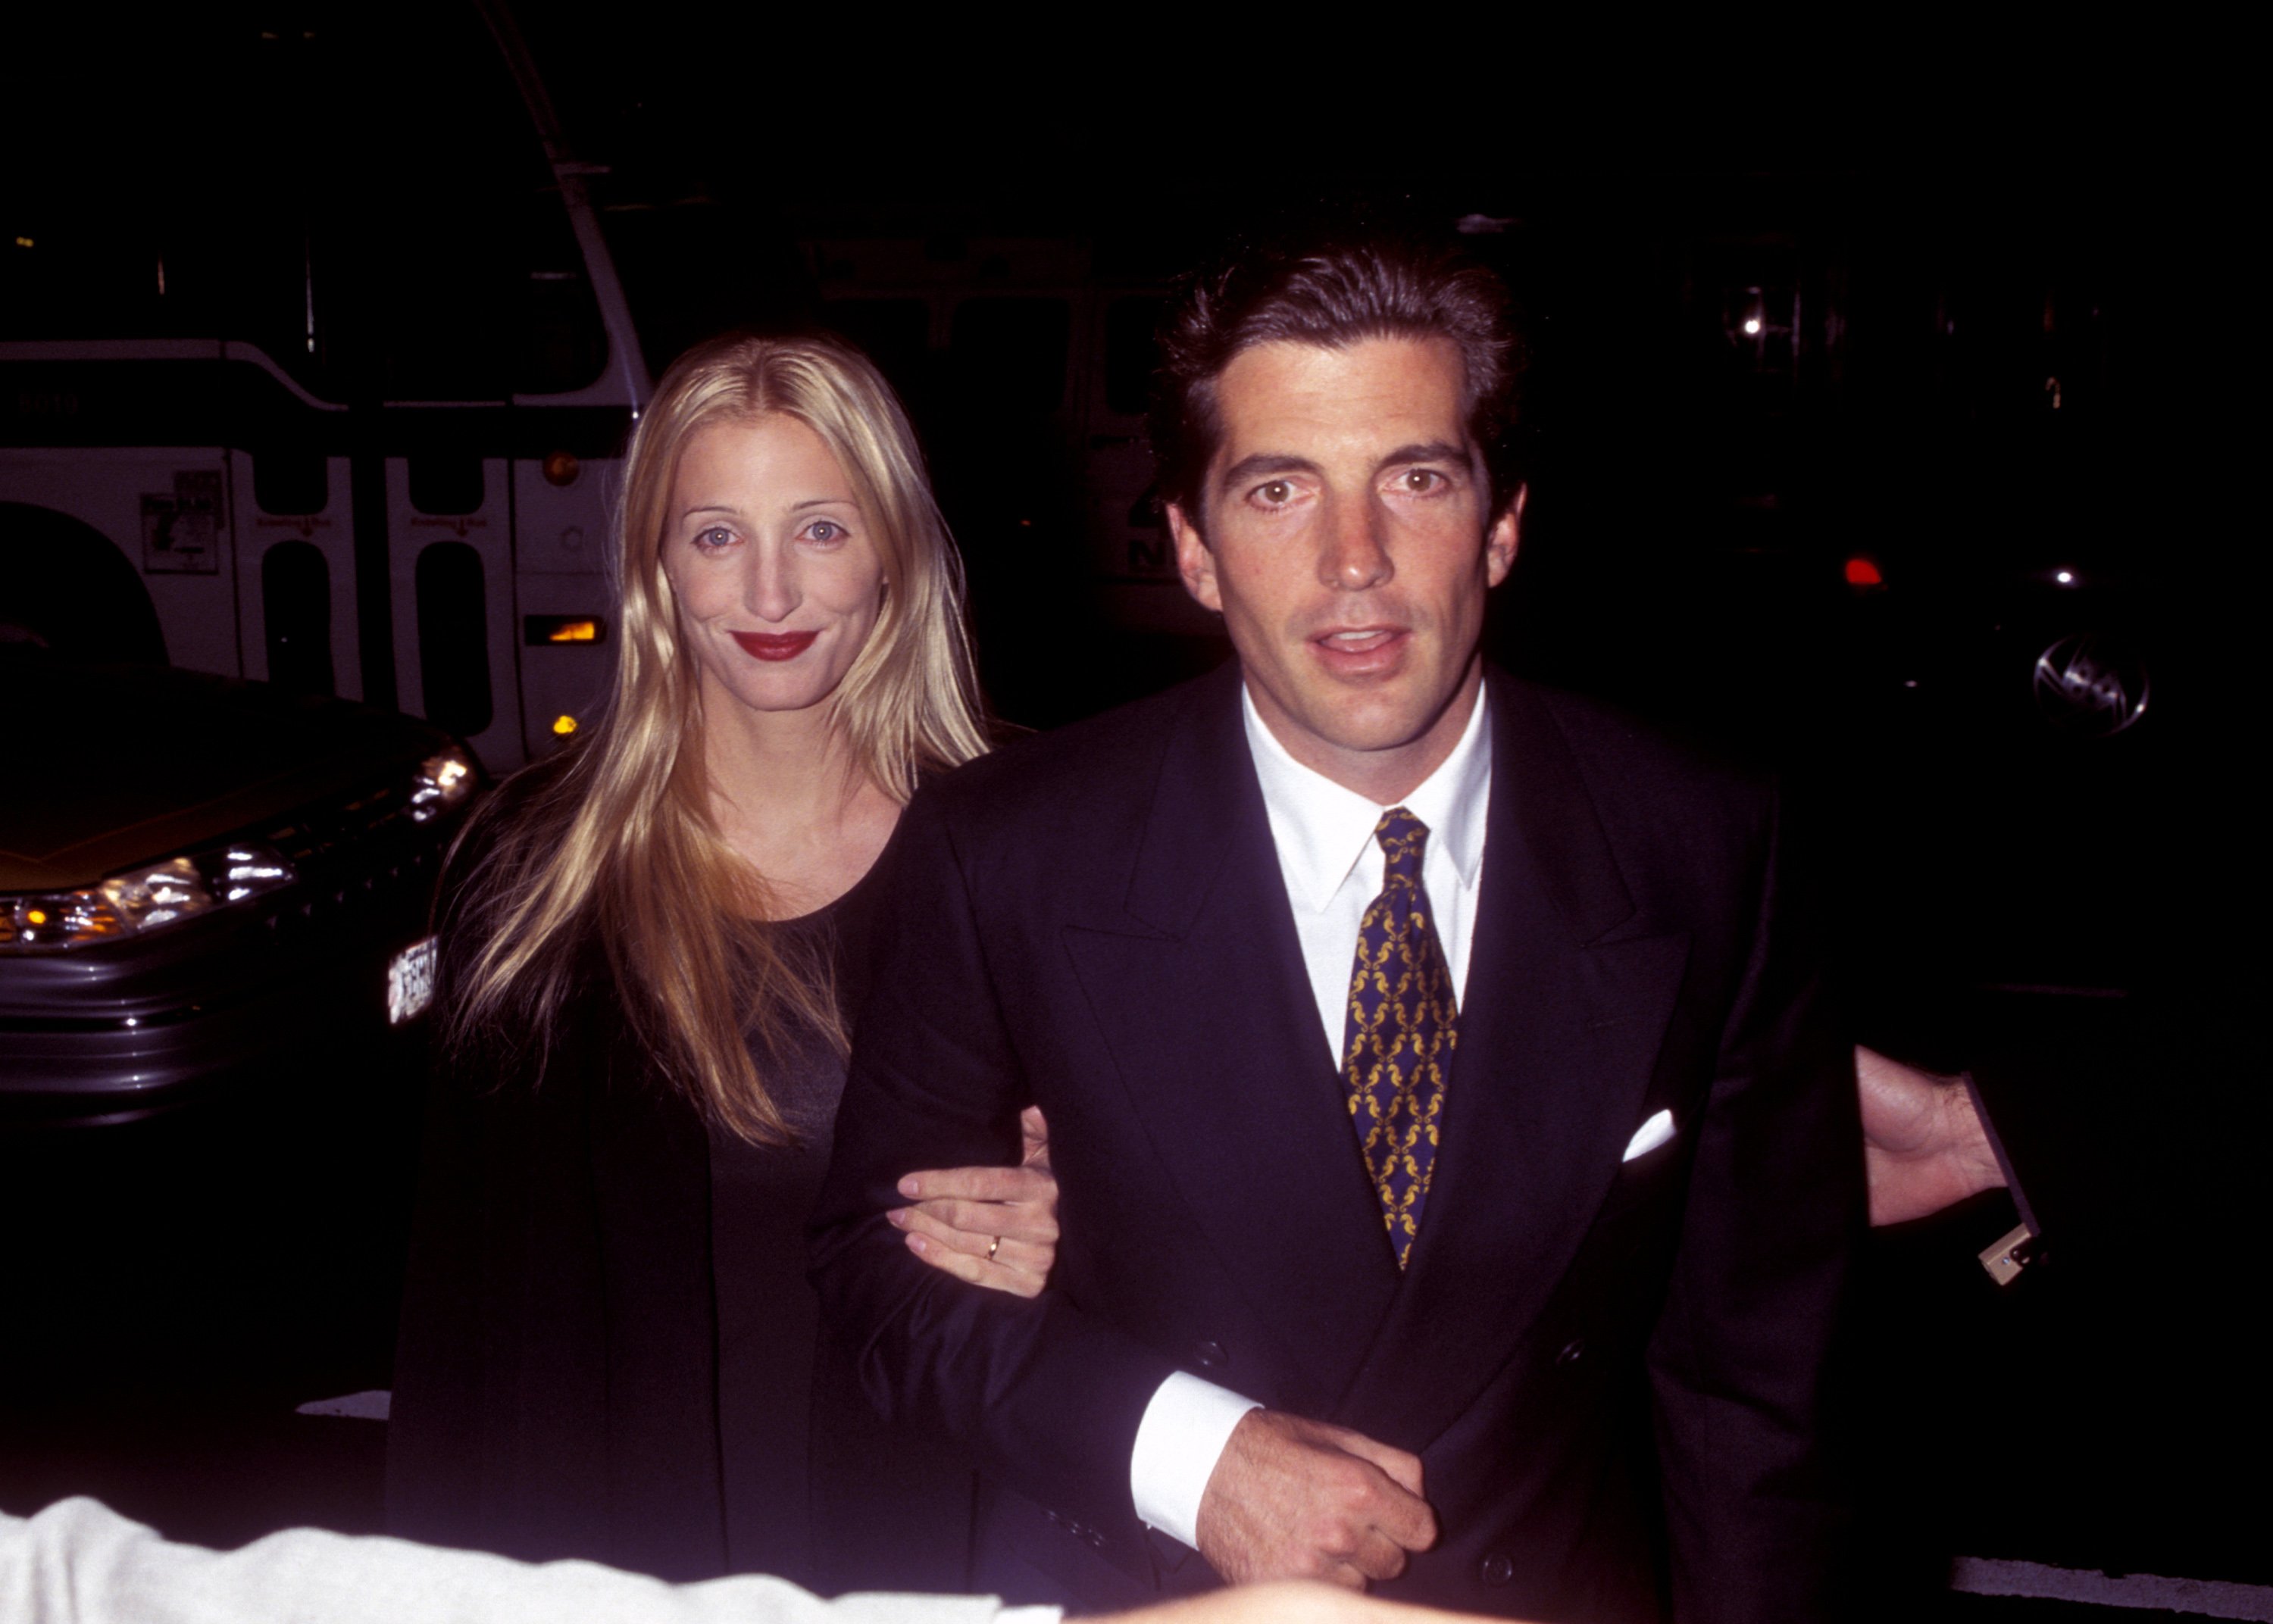 John F. Kennedy Jr. and Carolyn Bessette during the 2nd Anniversary Party of "George" Magazine. / Source: Getty Images